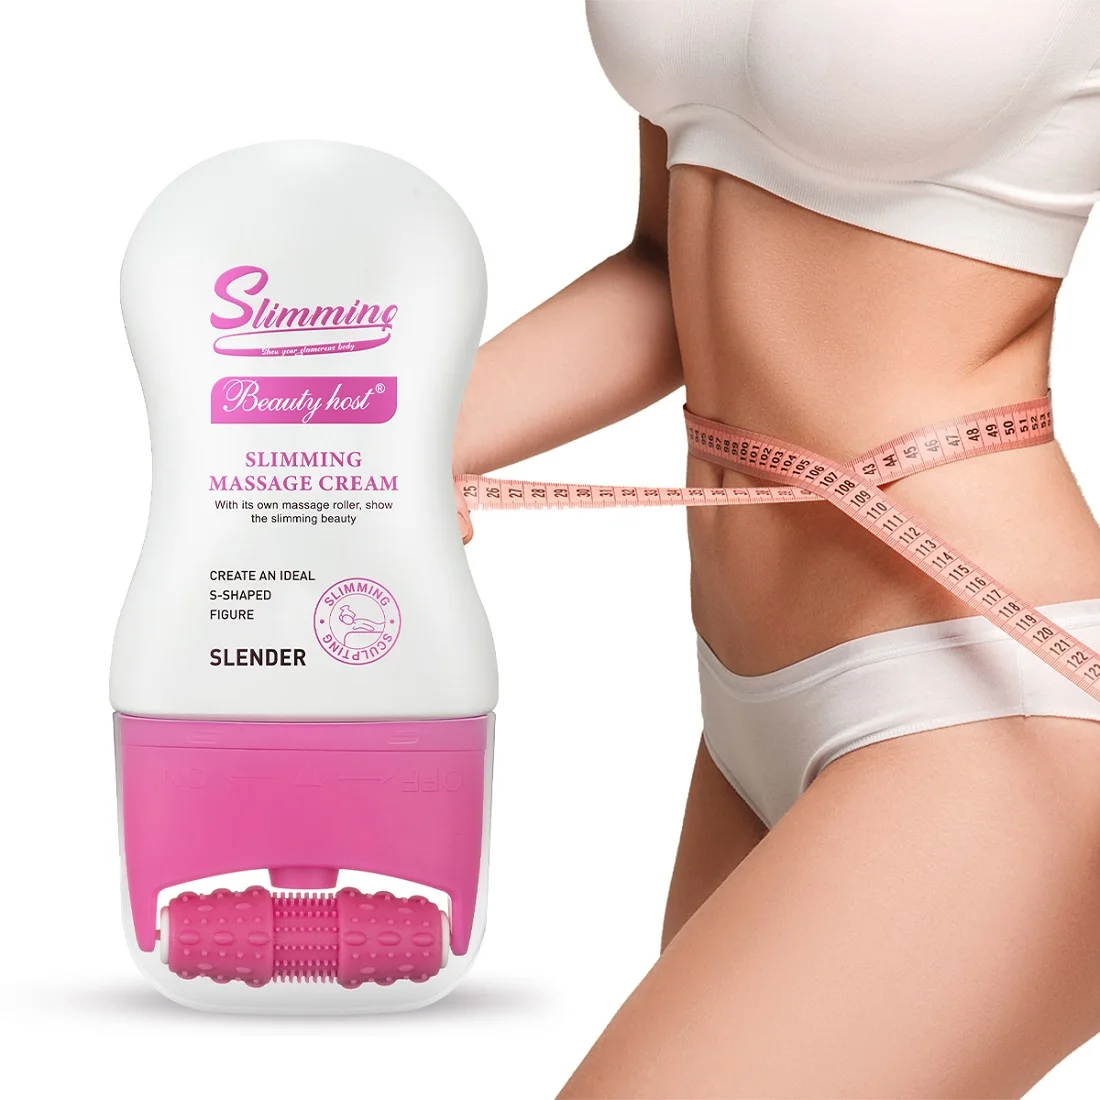 

Hot Sale Beauty Host 100g Slimming Massage Cream with Silicone Roller Natural Organic Weight Loss Lotion For Body Shaping